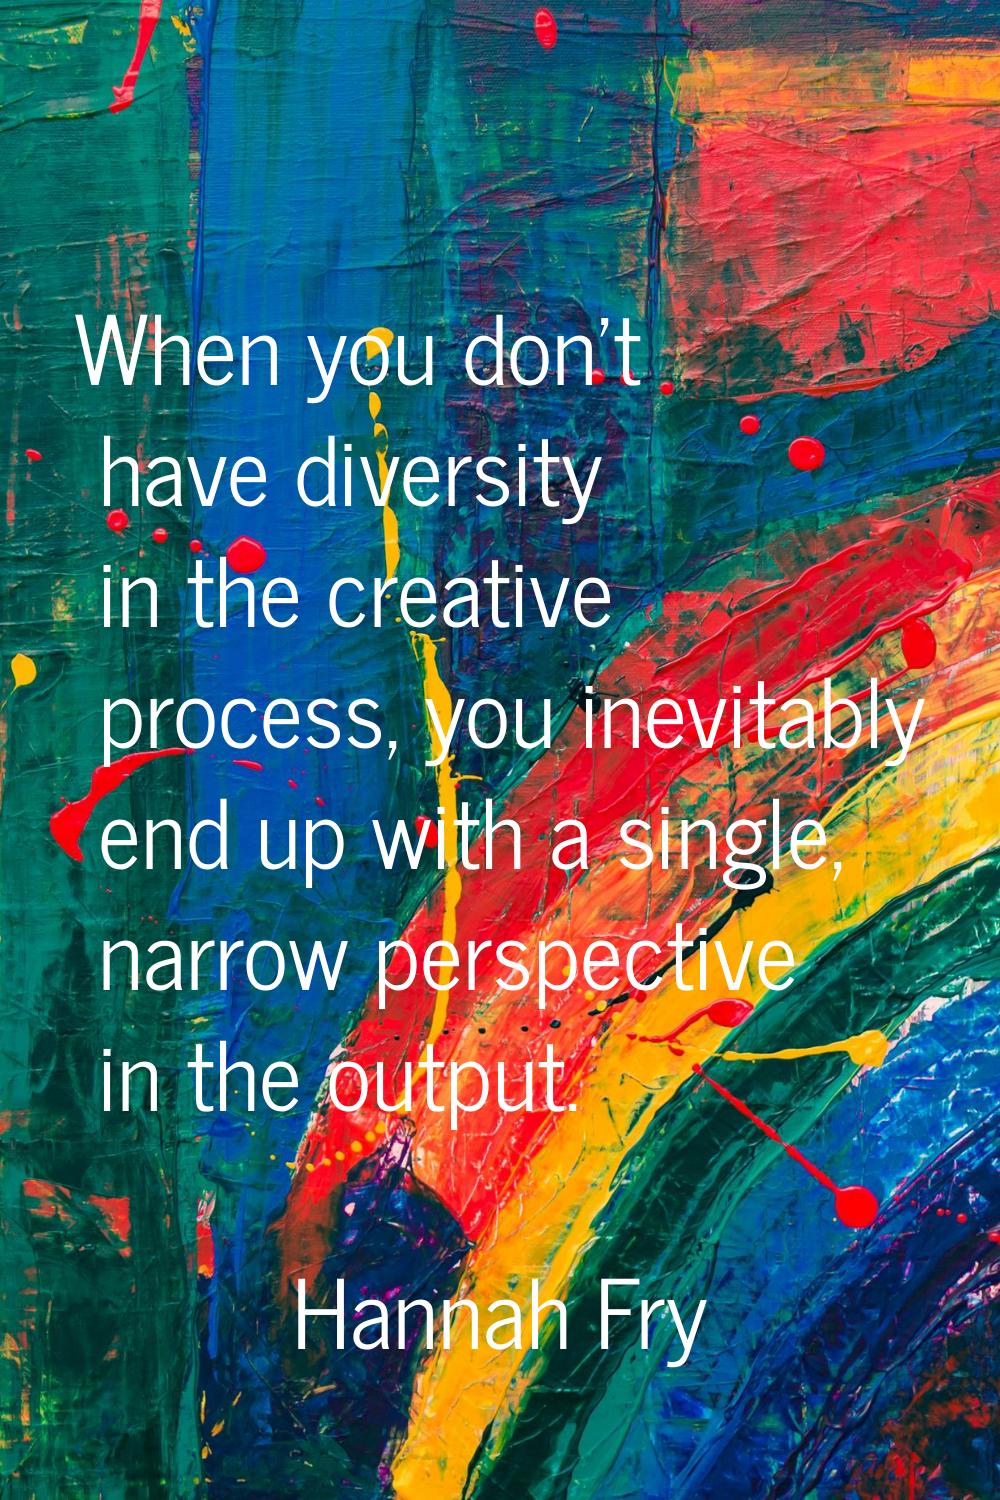 When you don't have diversity in the creative process, you inevitably end up with a single, narrow 